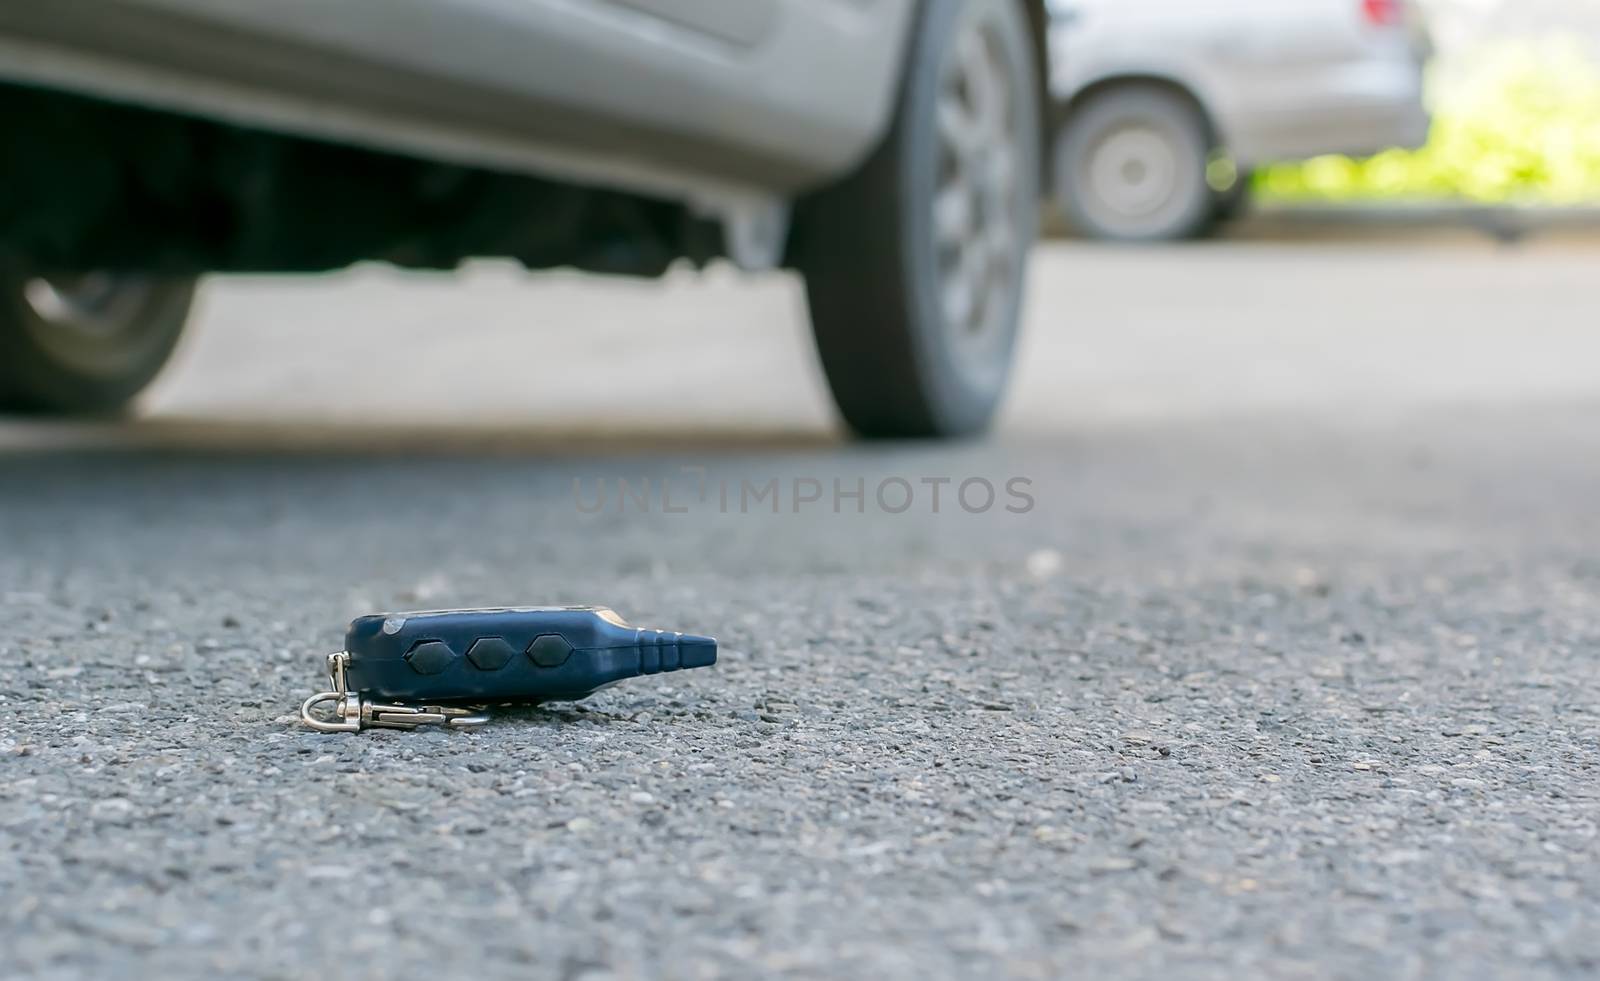 The lost keychain, car alarm remote, lies on the asphalted sidewalk of the road by jk3030